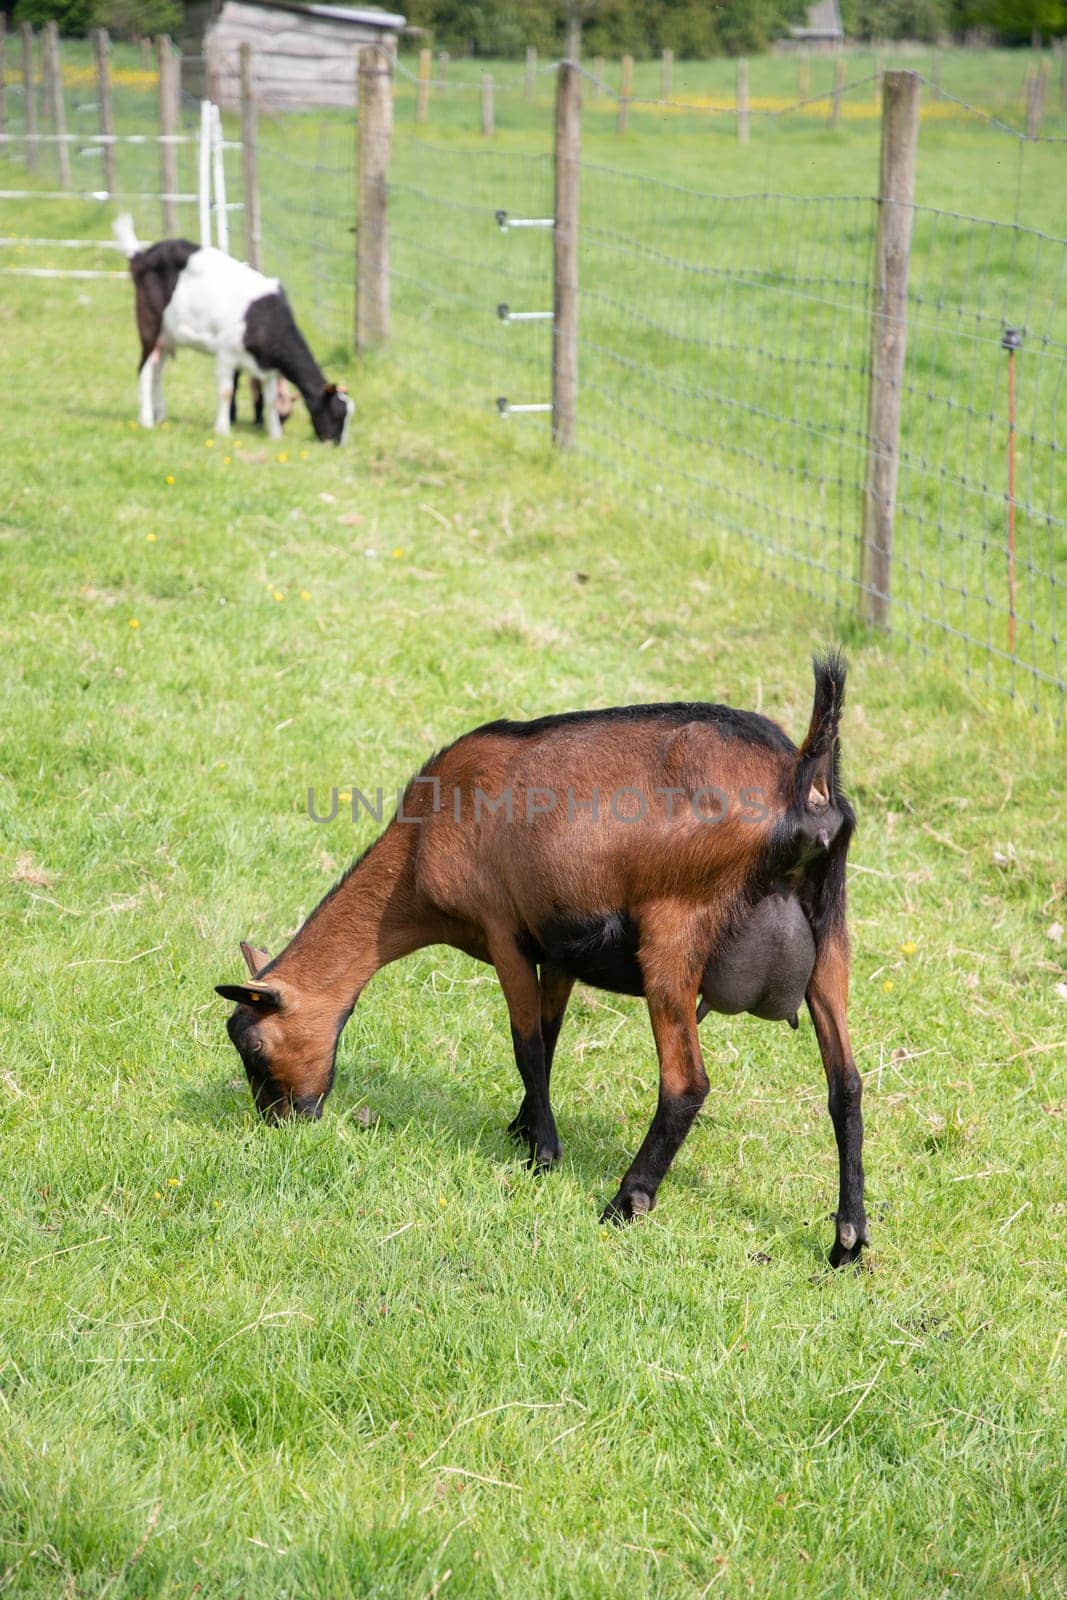 A braun goat chews grass on a green field, the concept of breeding goats for milk and cheese, ecological animal husbandry, High quality photo